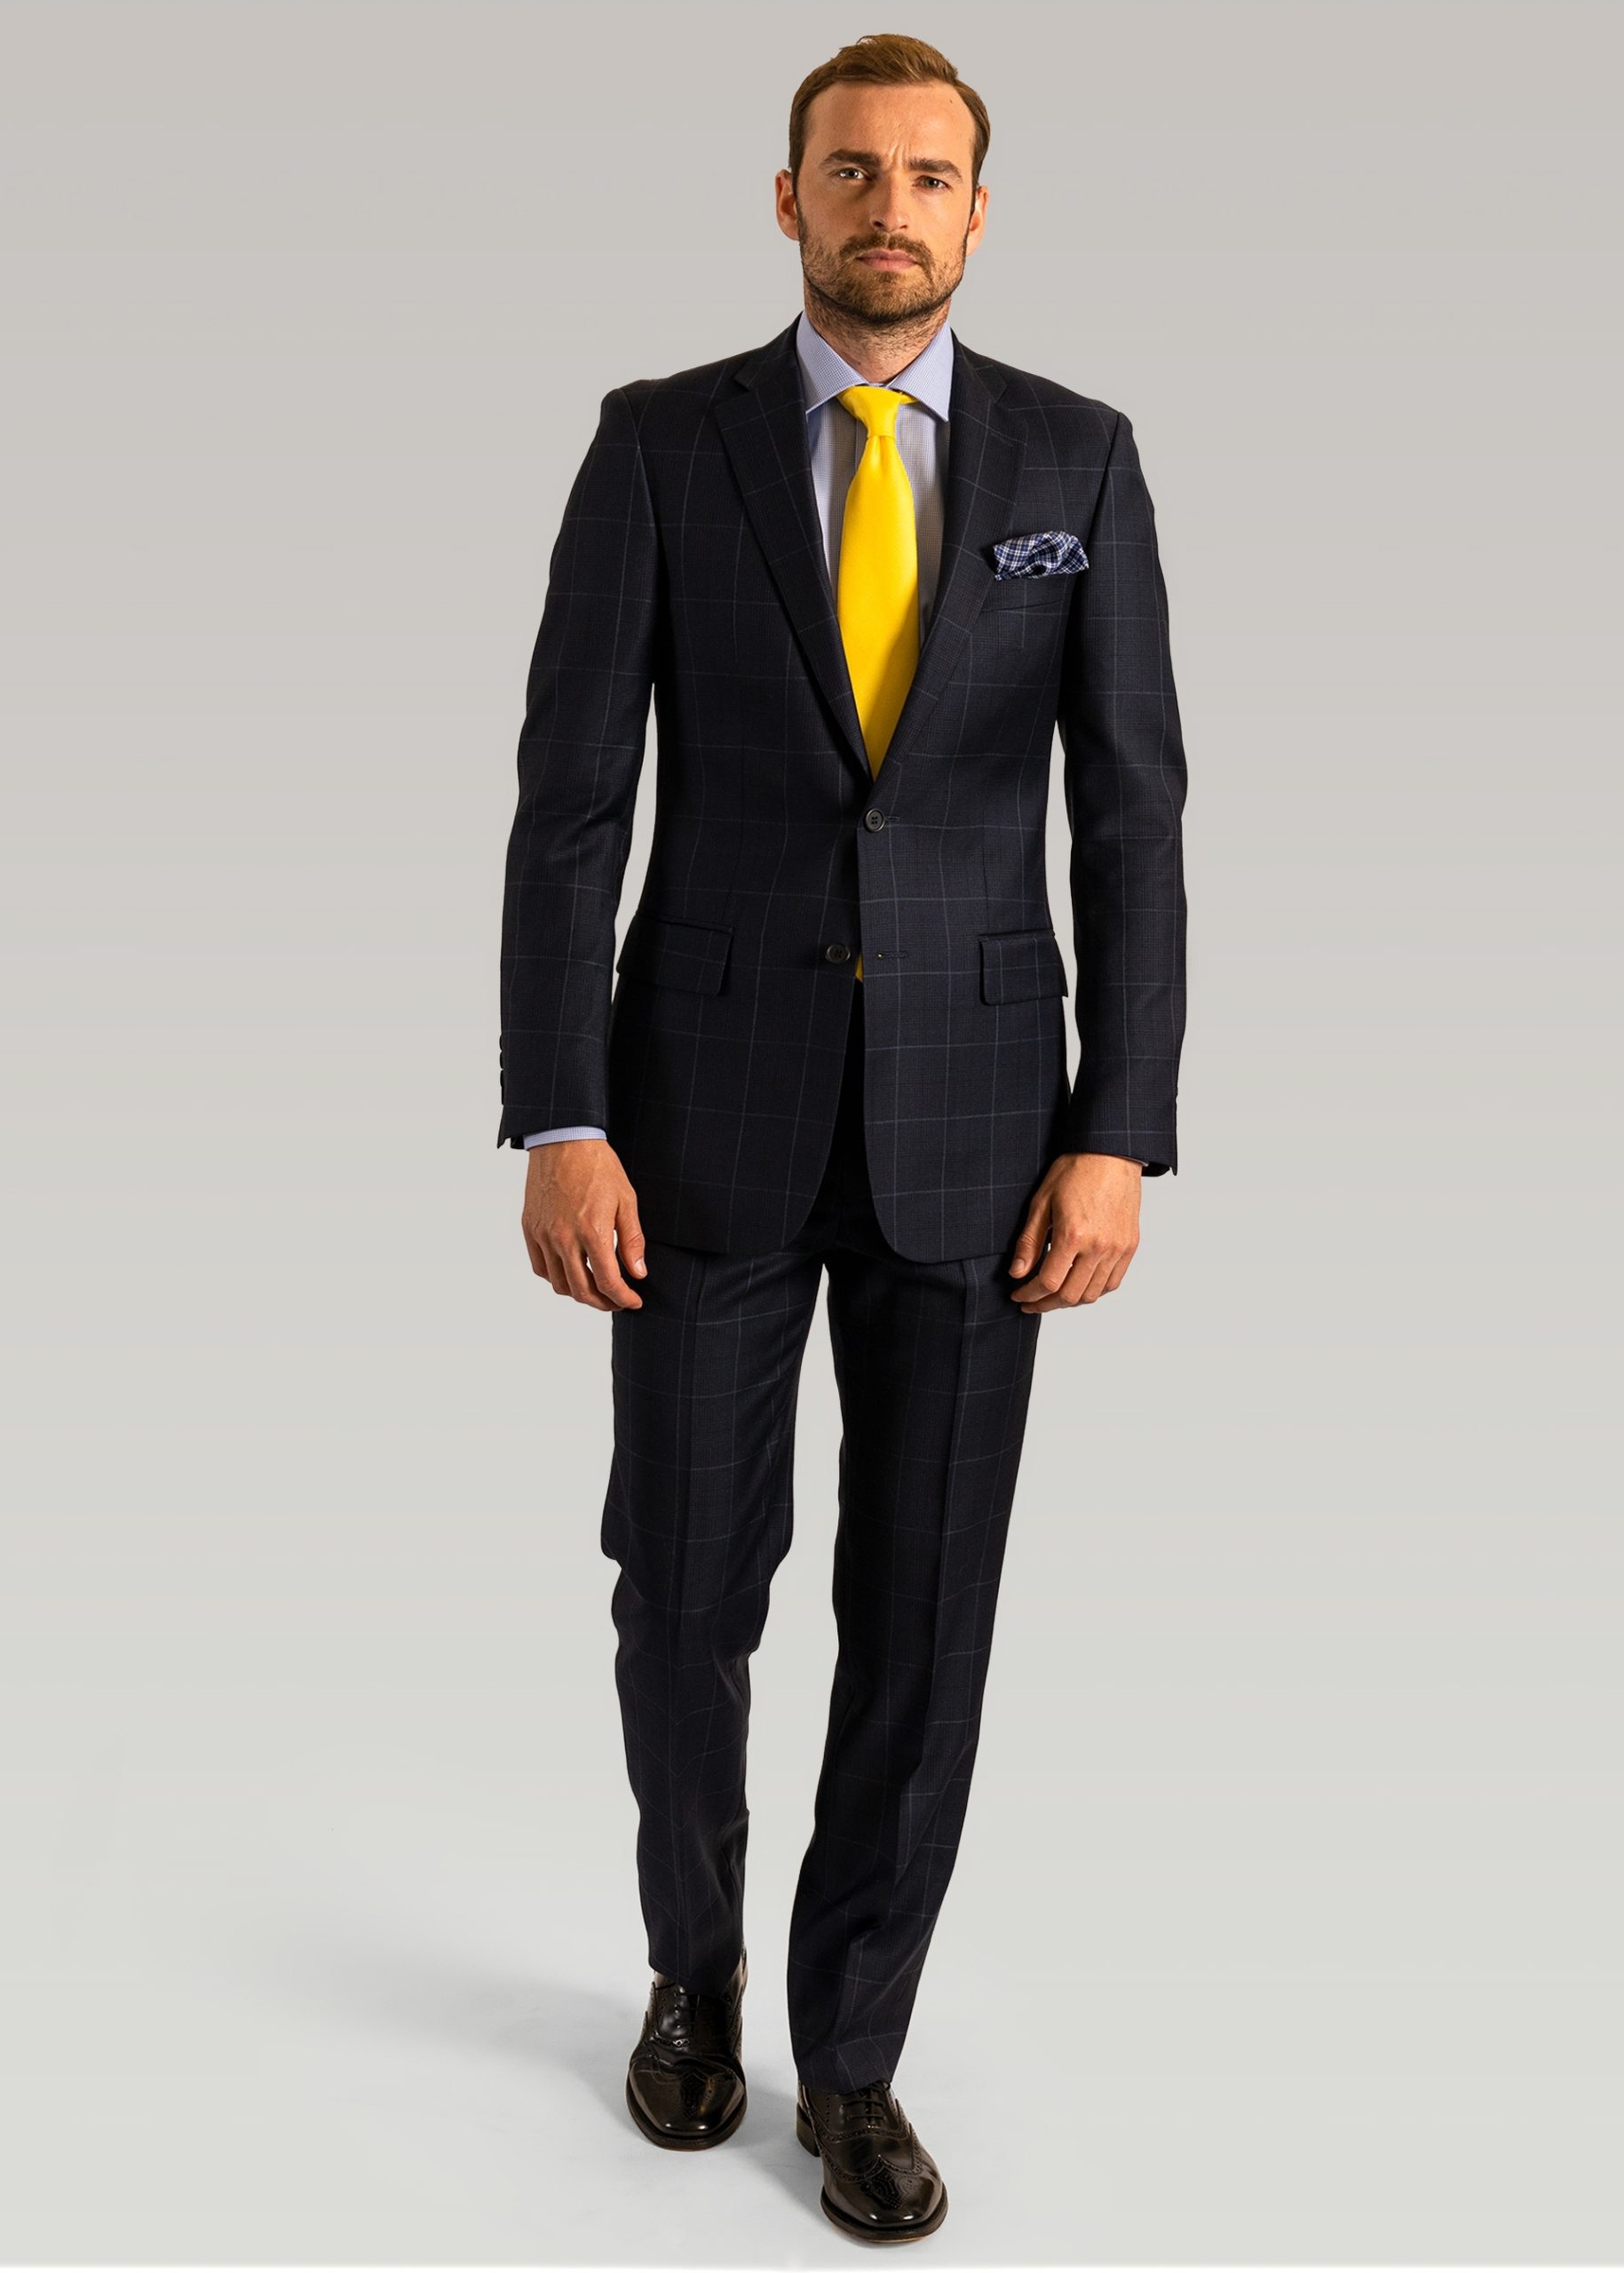 Roderick Charles windowpane tailored fit suit with yellow tie